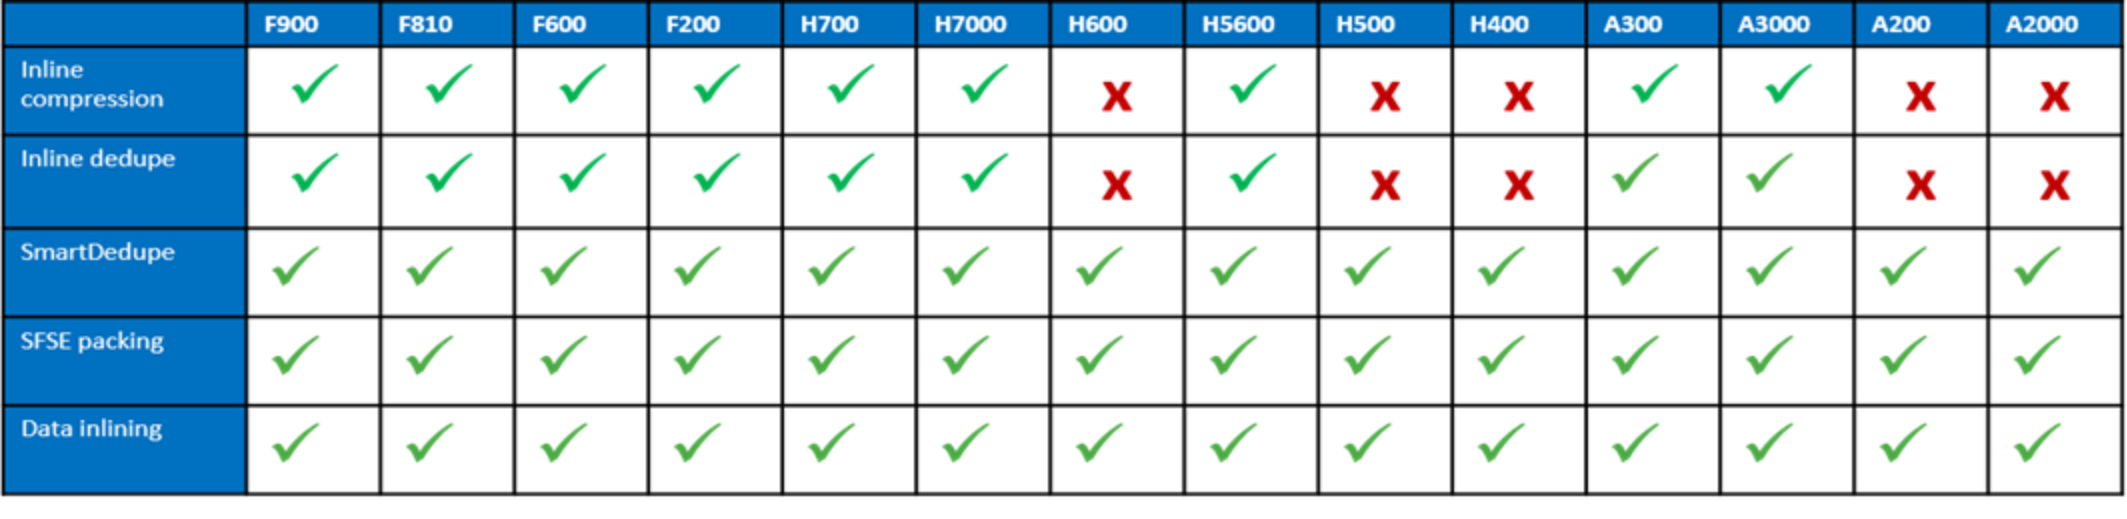 Table showing which data reduction features are available on each PowerScale hardware platform: